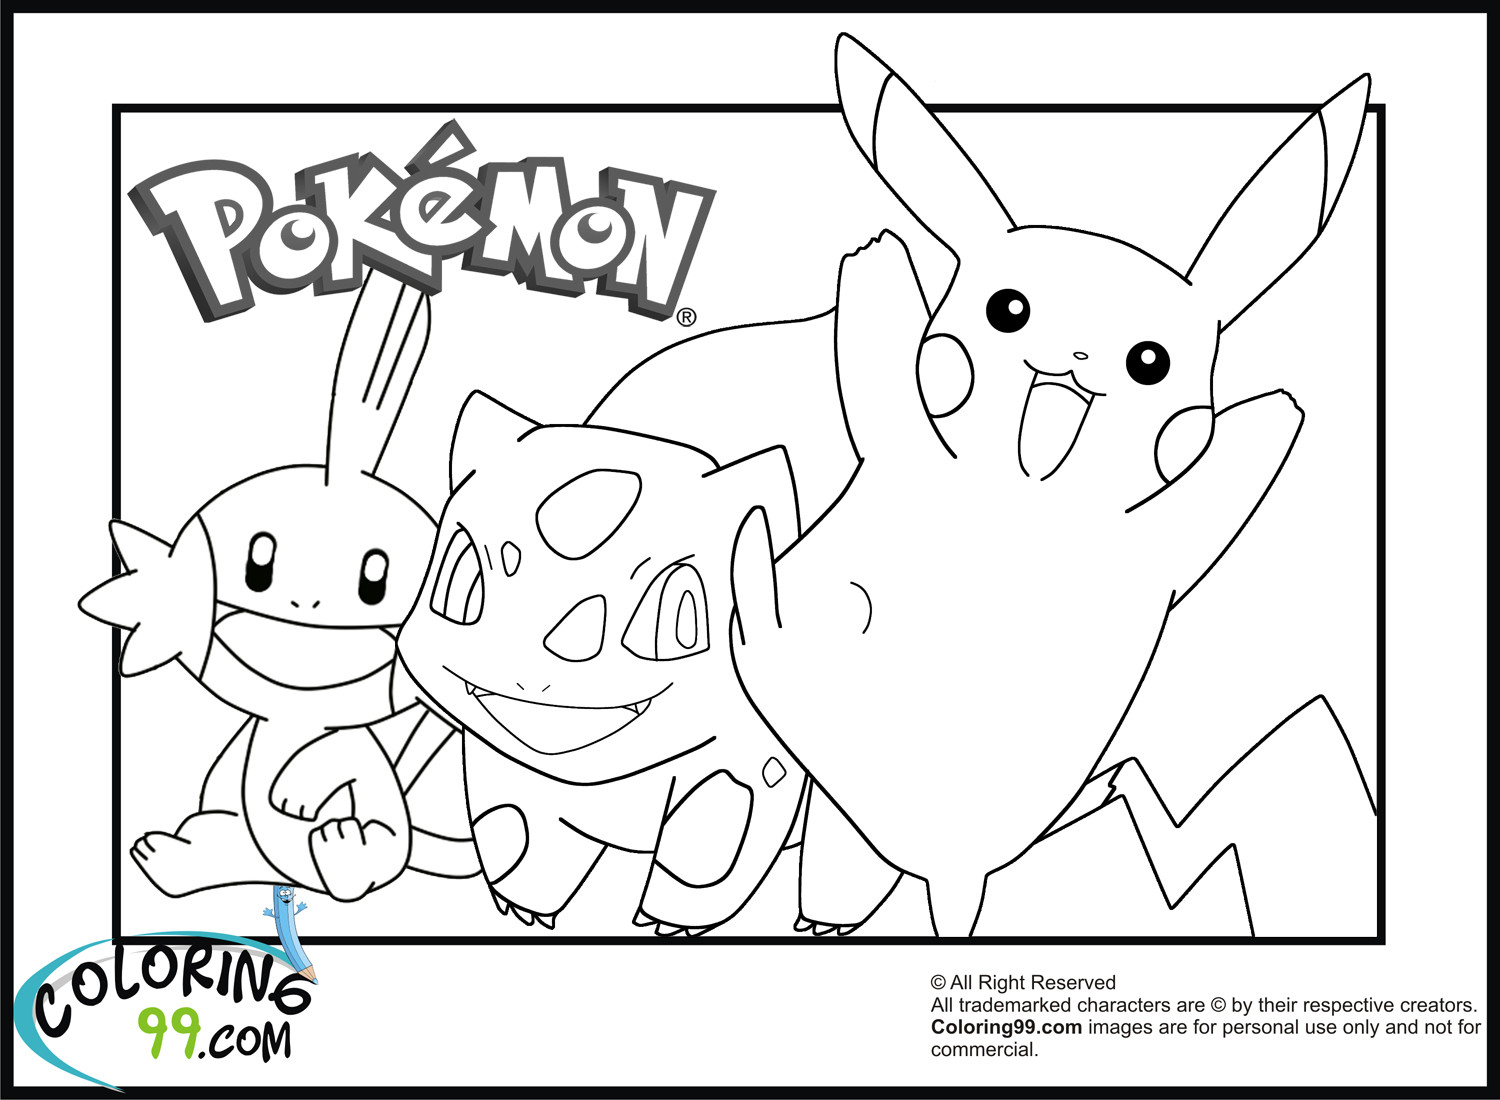 Coloring Sheets For Girls Picachoo
 Cute Pokemon Coloring Pages To Print Pikachu